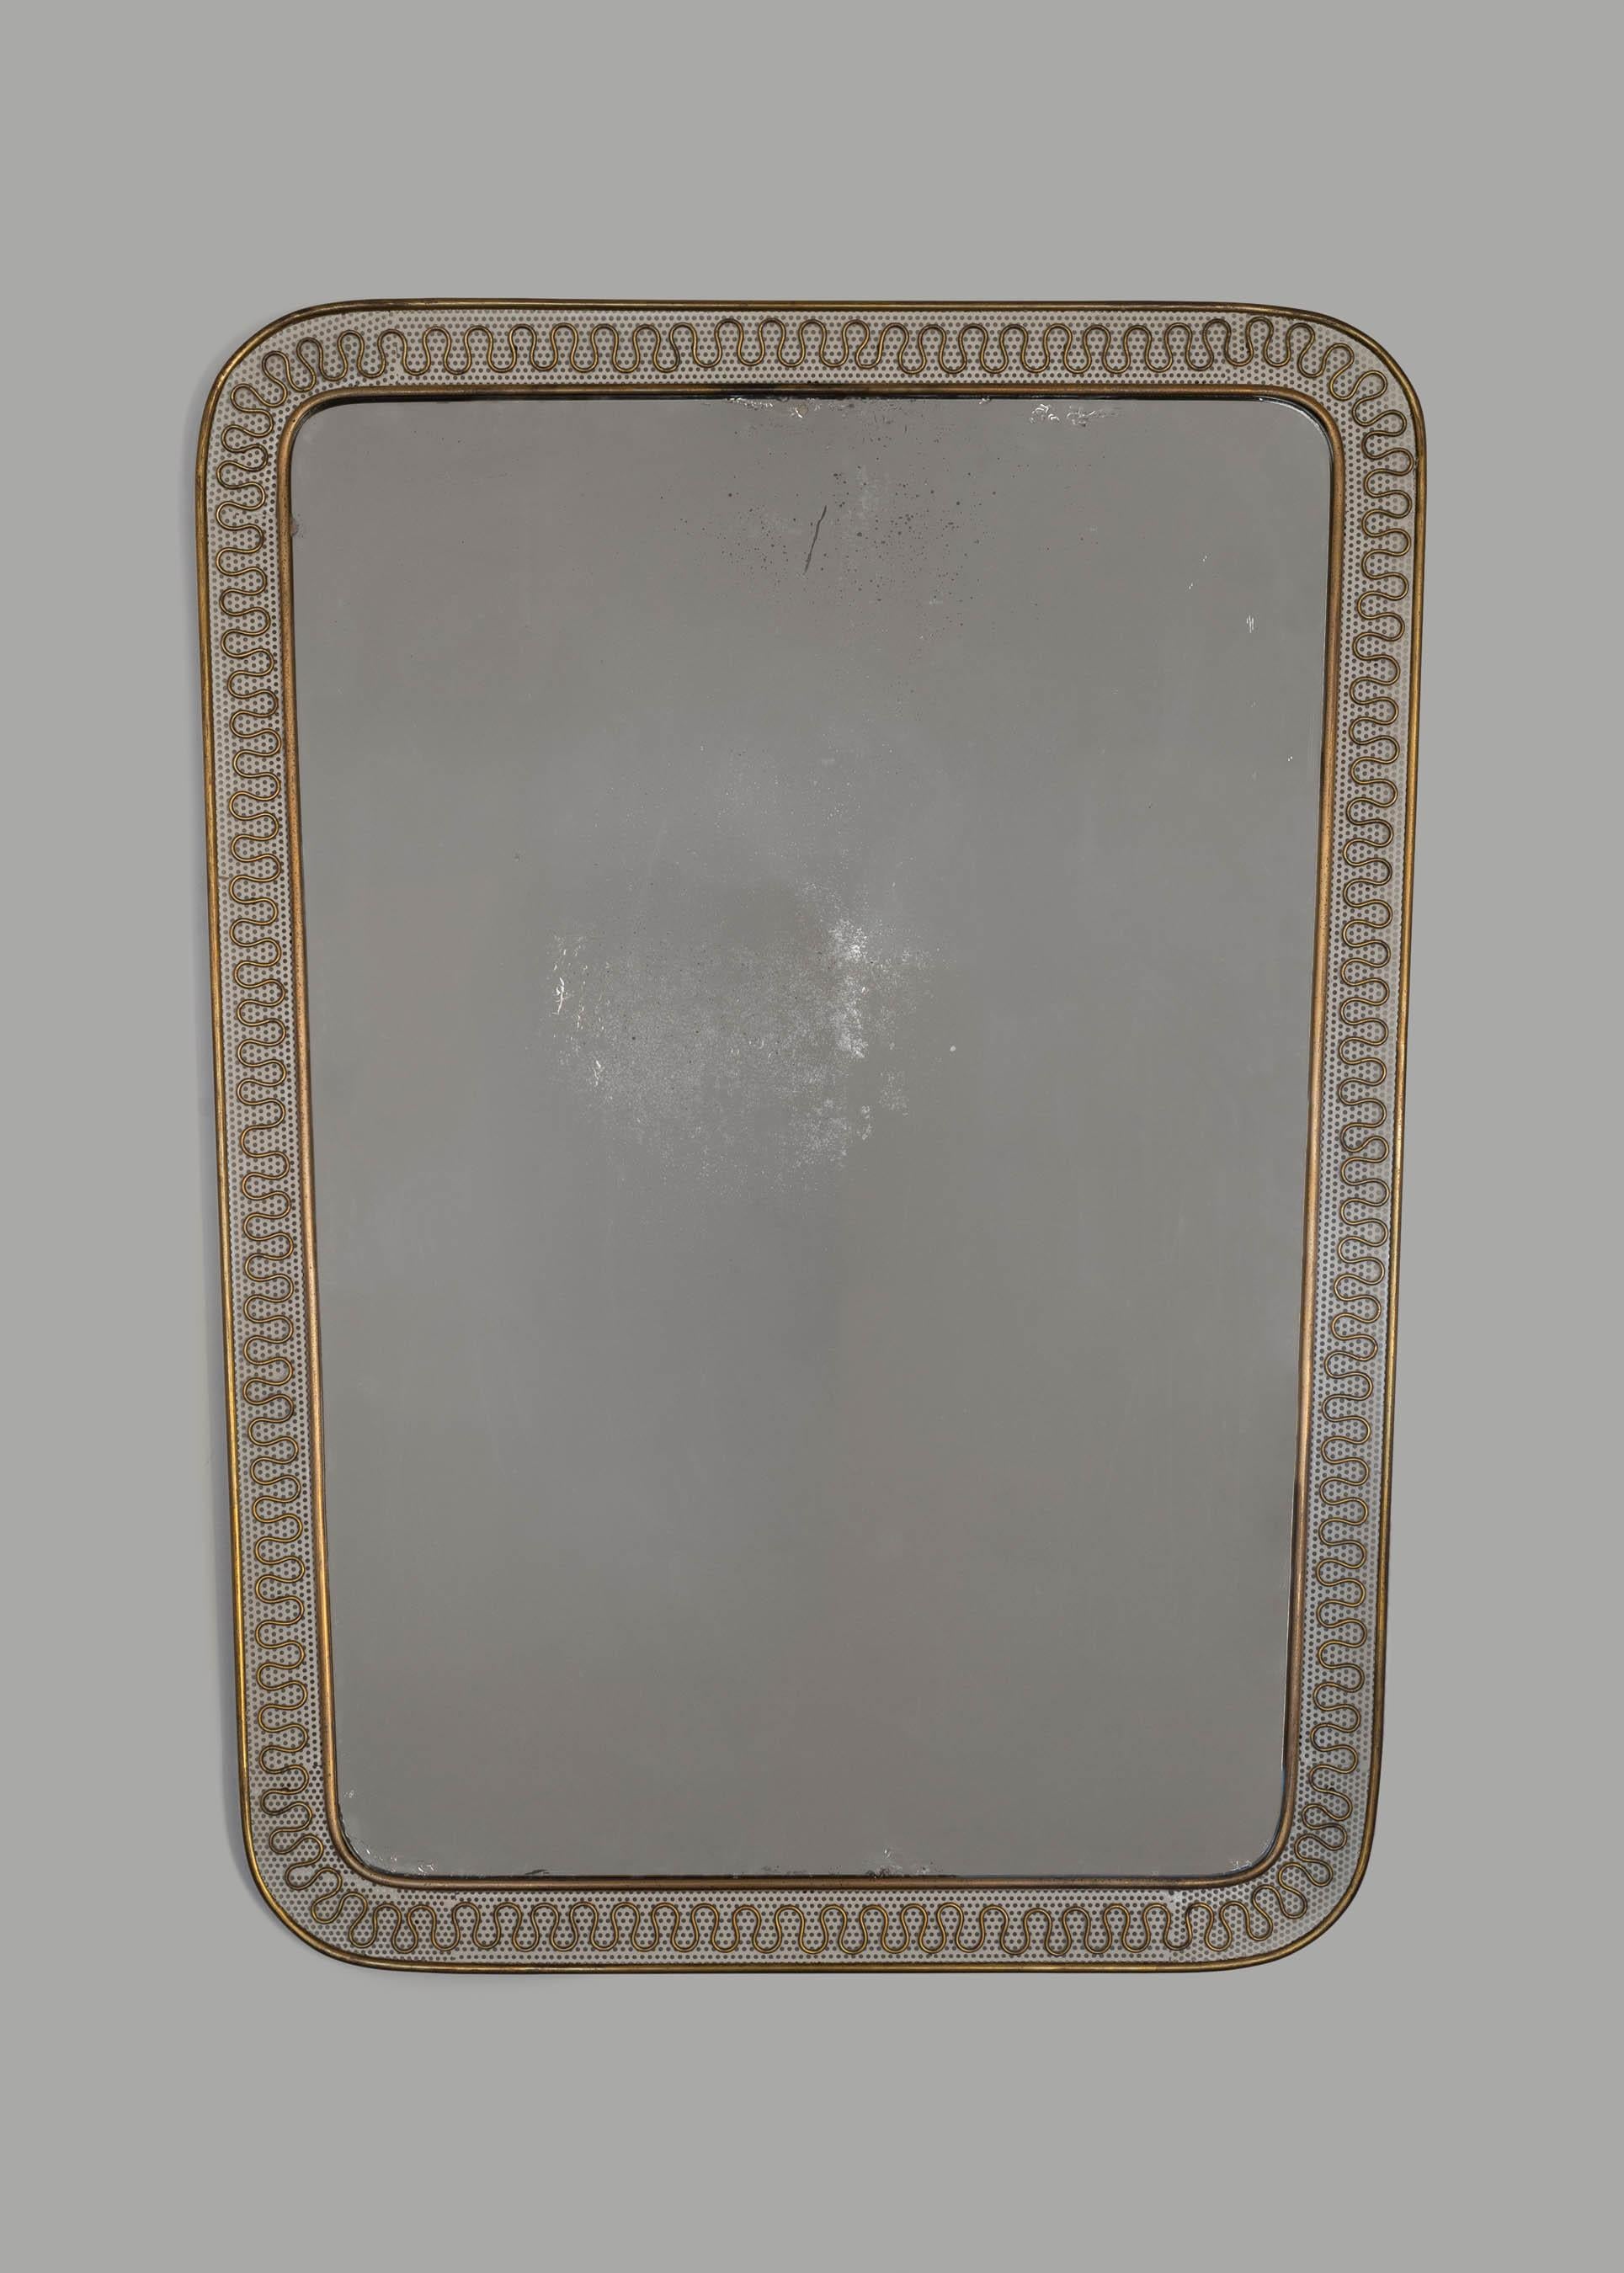 Italian brass and perforated metal mirror by Carlo Erba. Made in Italy circa 1950s.